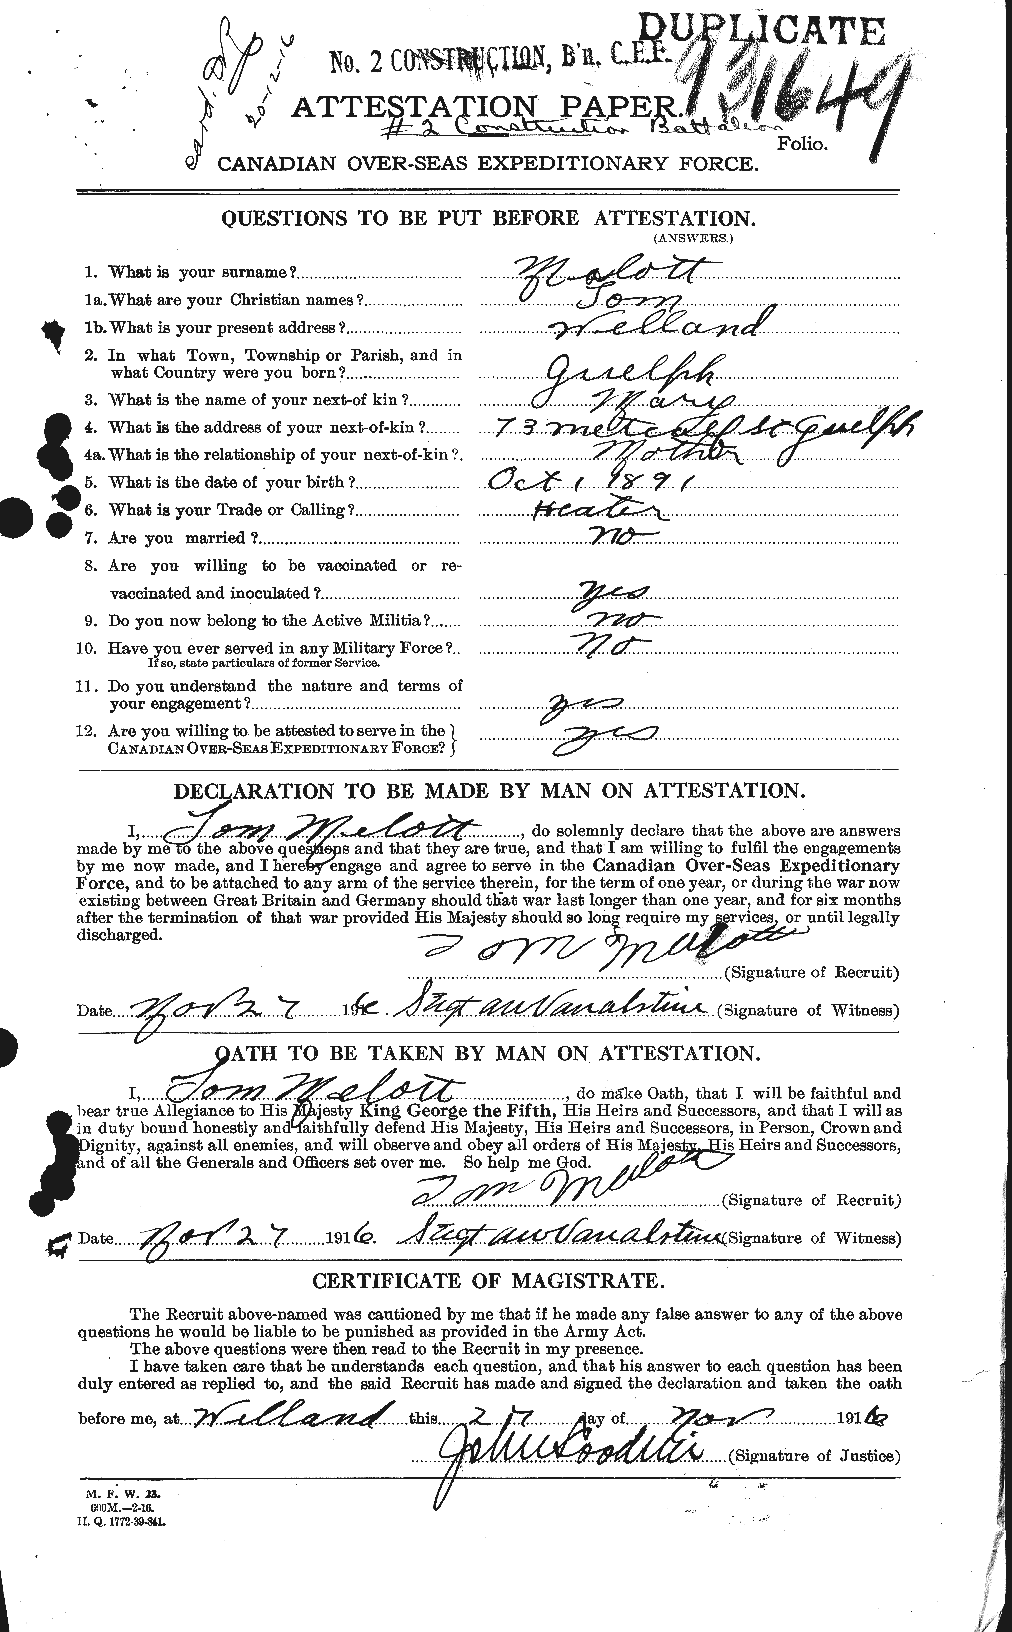 Personnel Records of the First World War - CEF 479064a